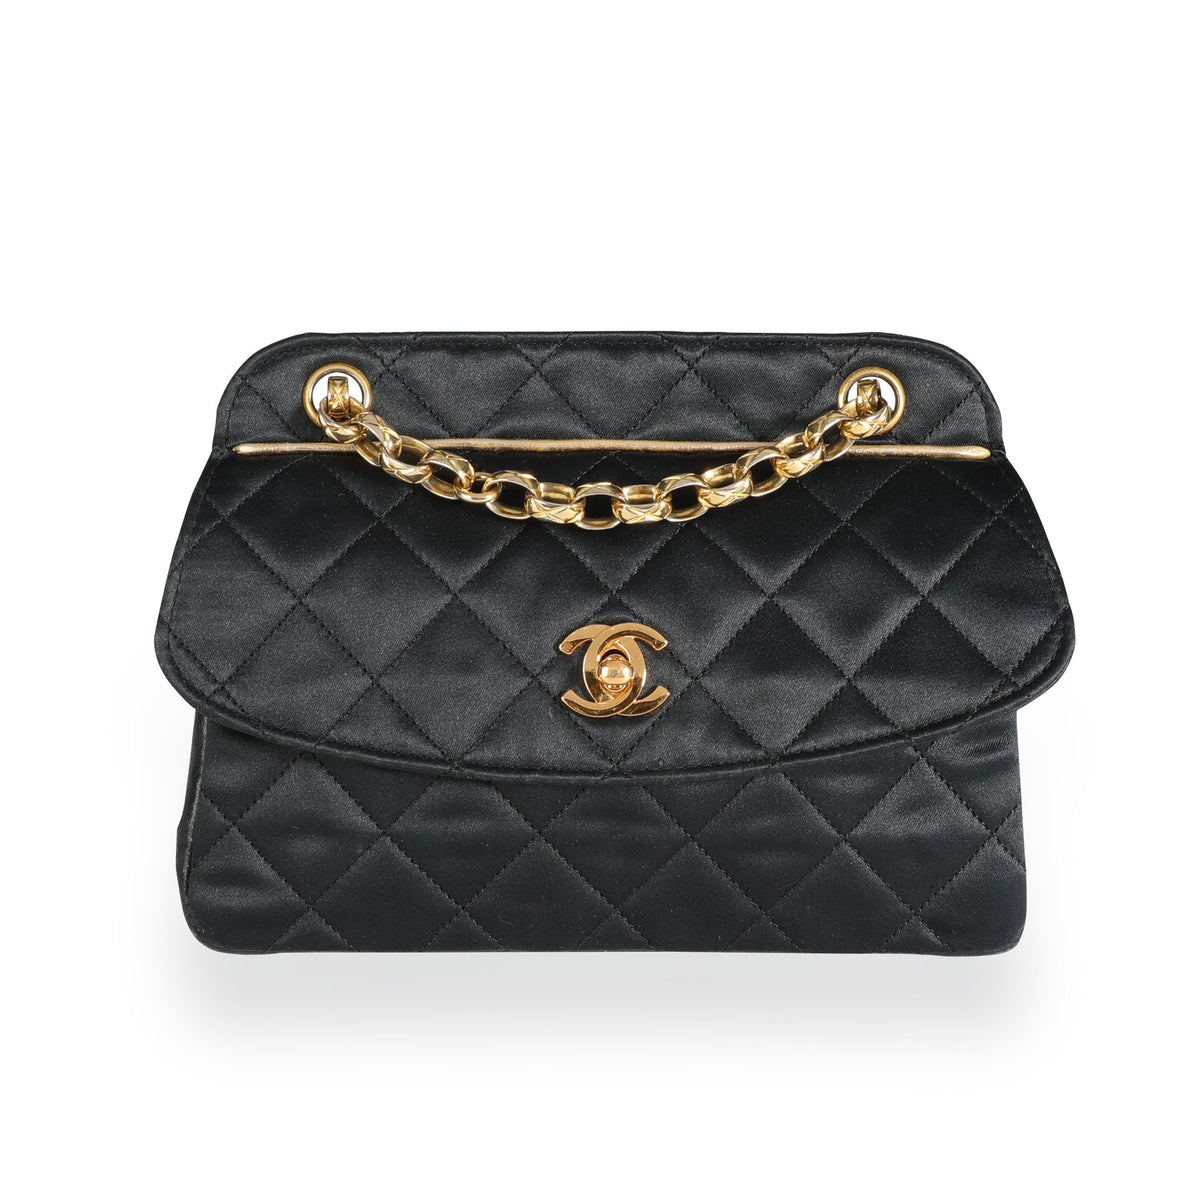 Chanel Vintage Black Quilted Satin Mini Flap Bag with Pouch